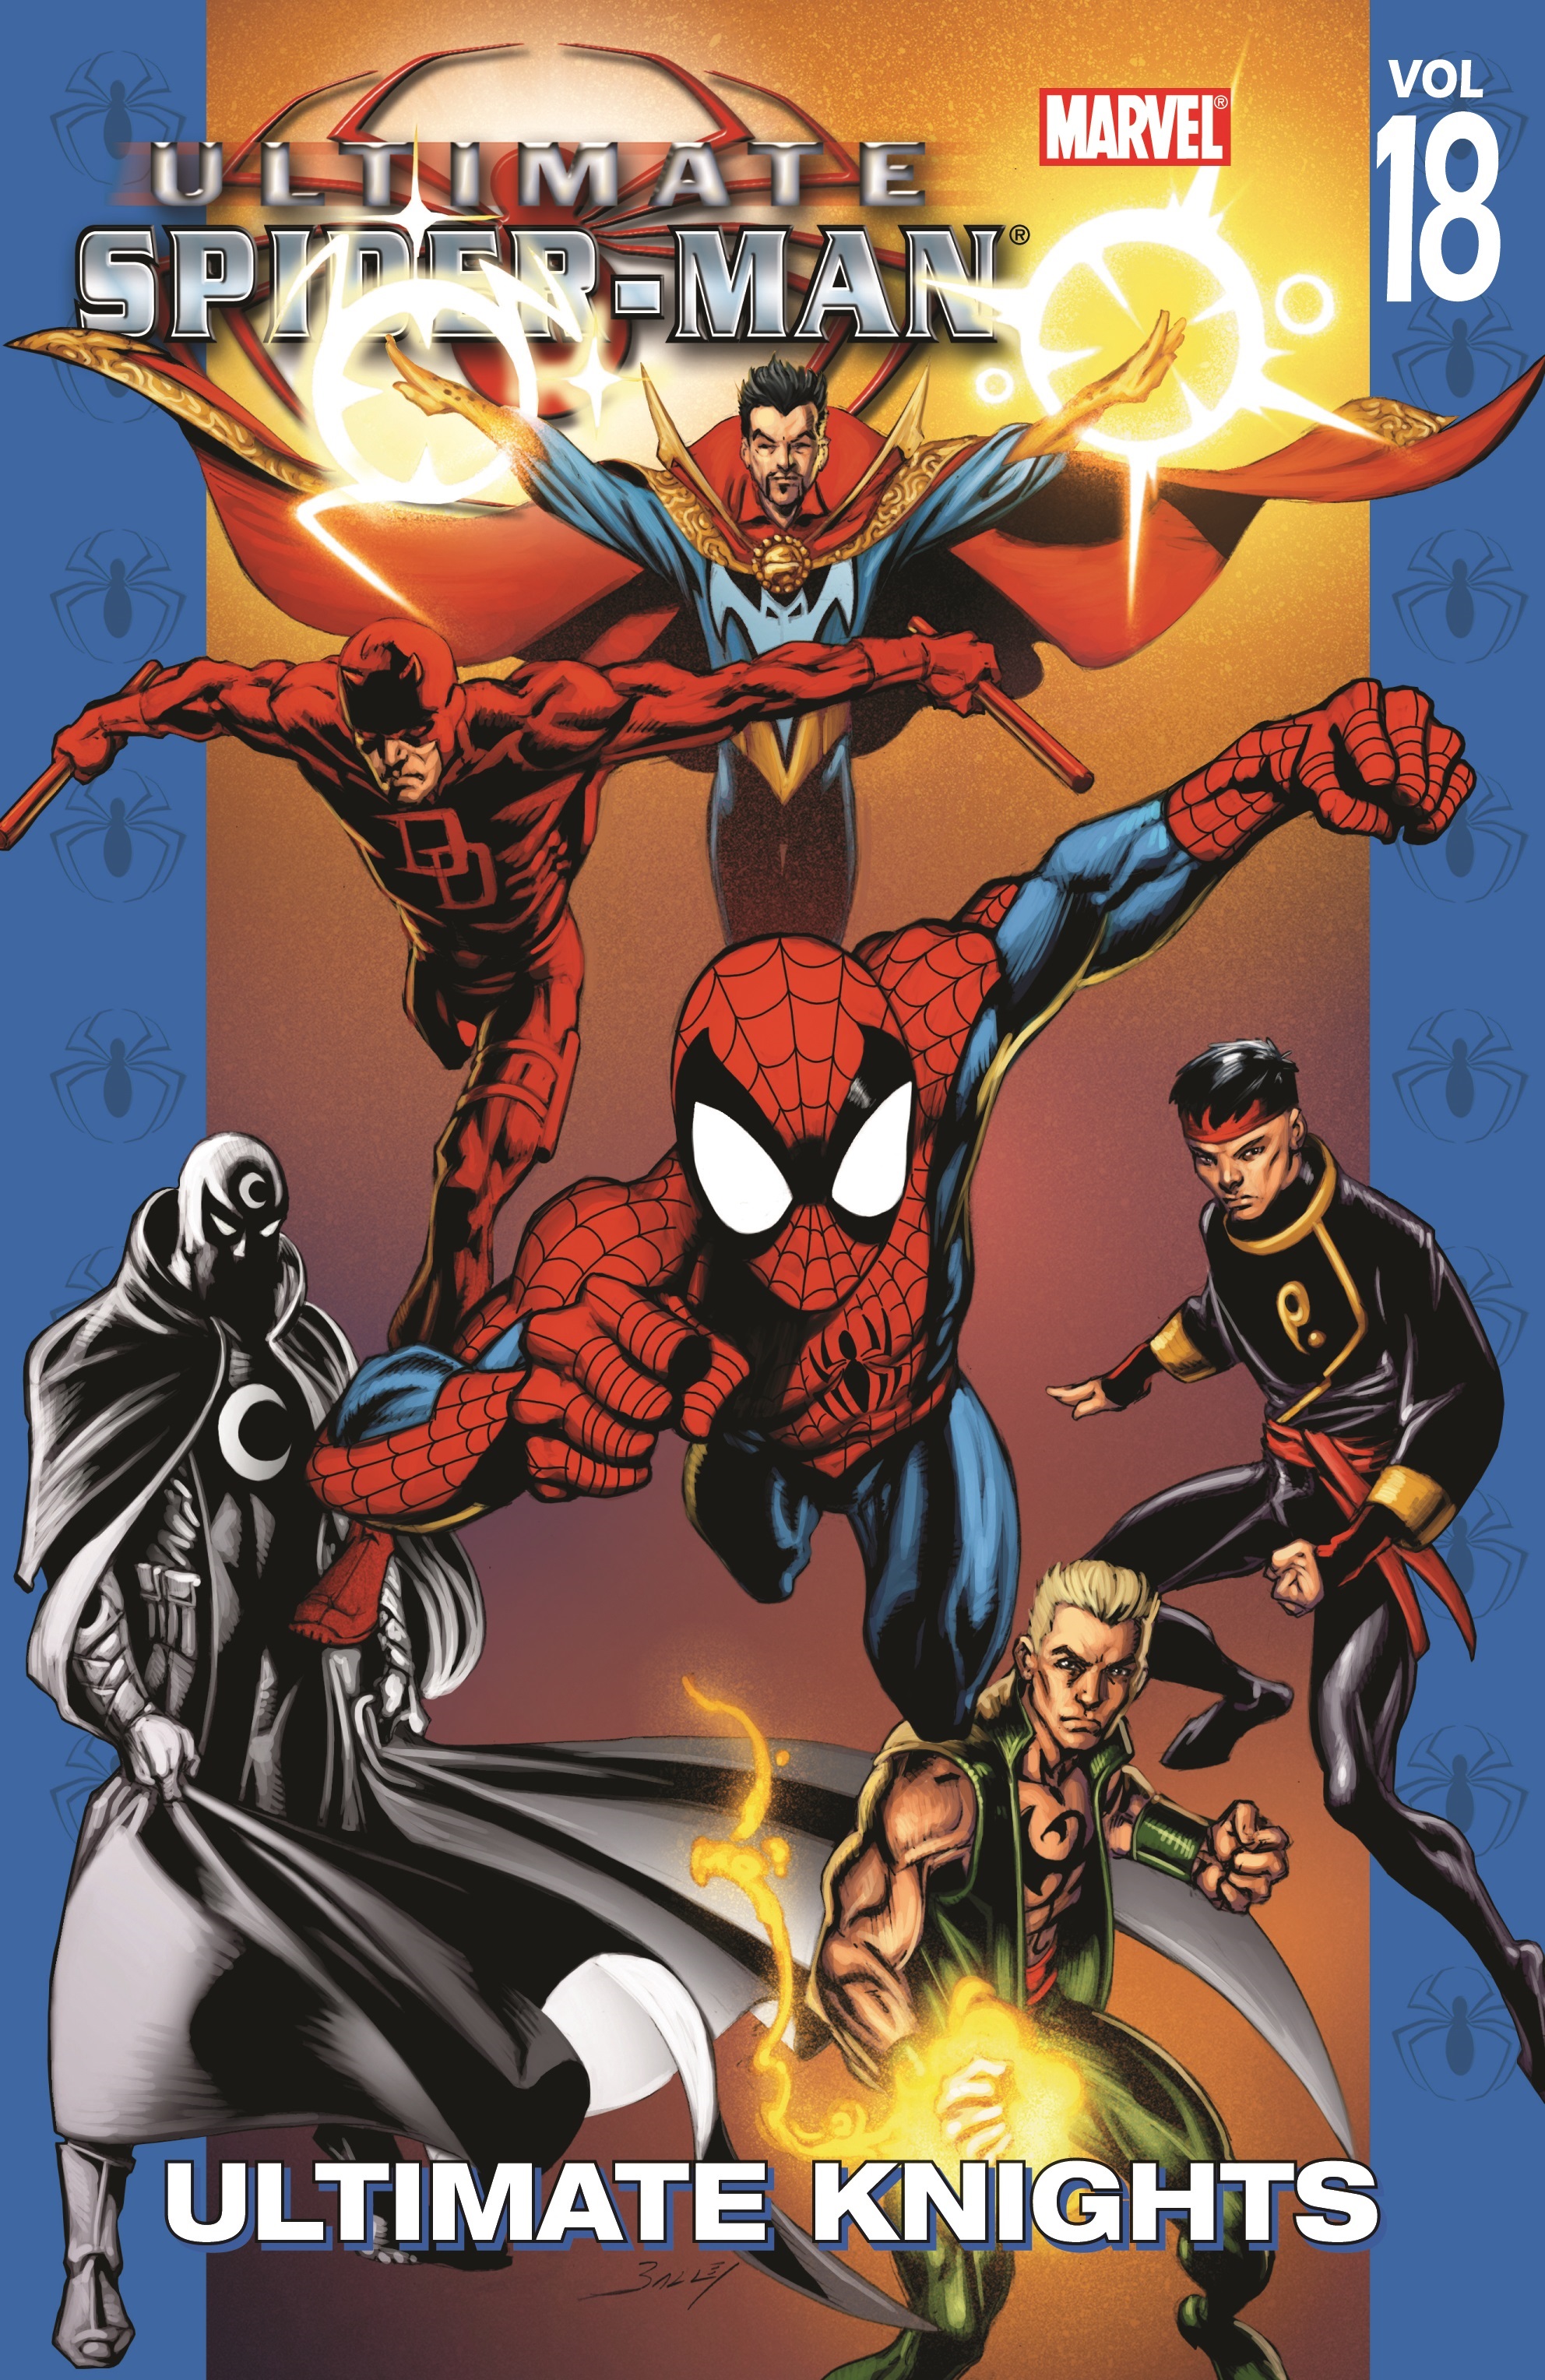 Ultimate Spider-Man Vol. 18: Ultimate Knights (Trade Paperback)